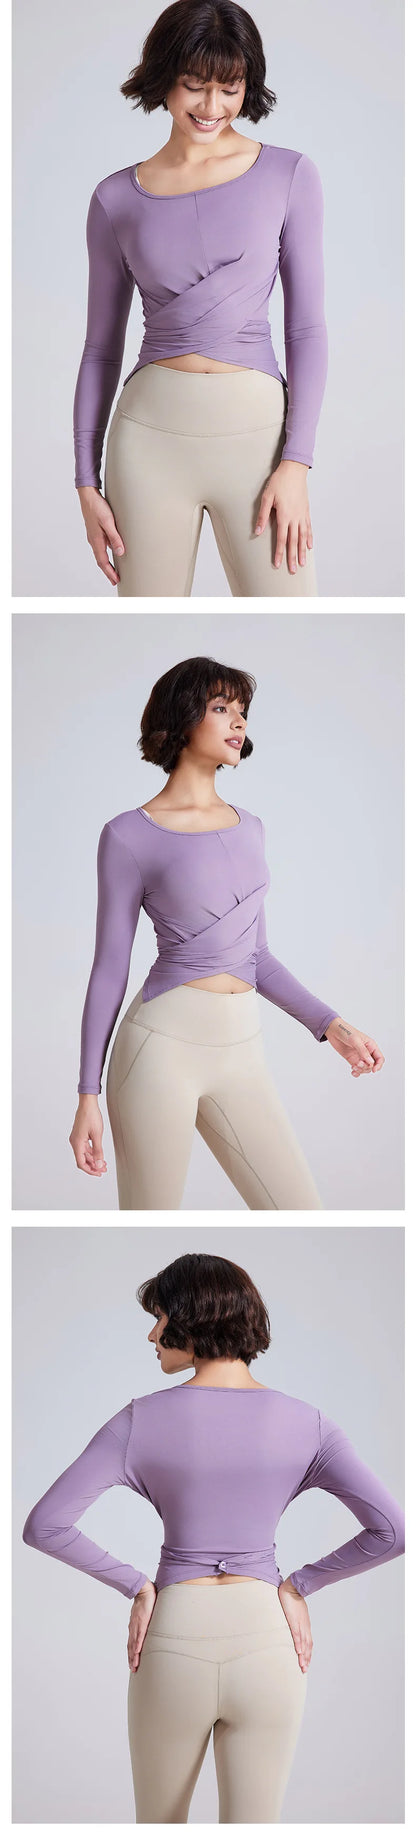 Stay Stylish and Comfortable: Cross Button Pilates-Ready Top